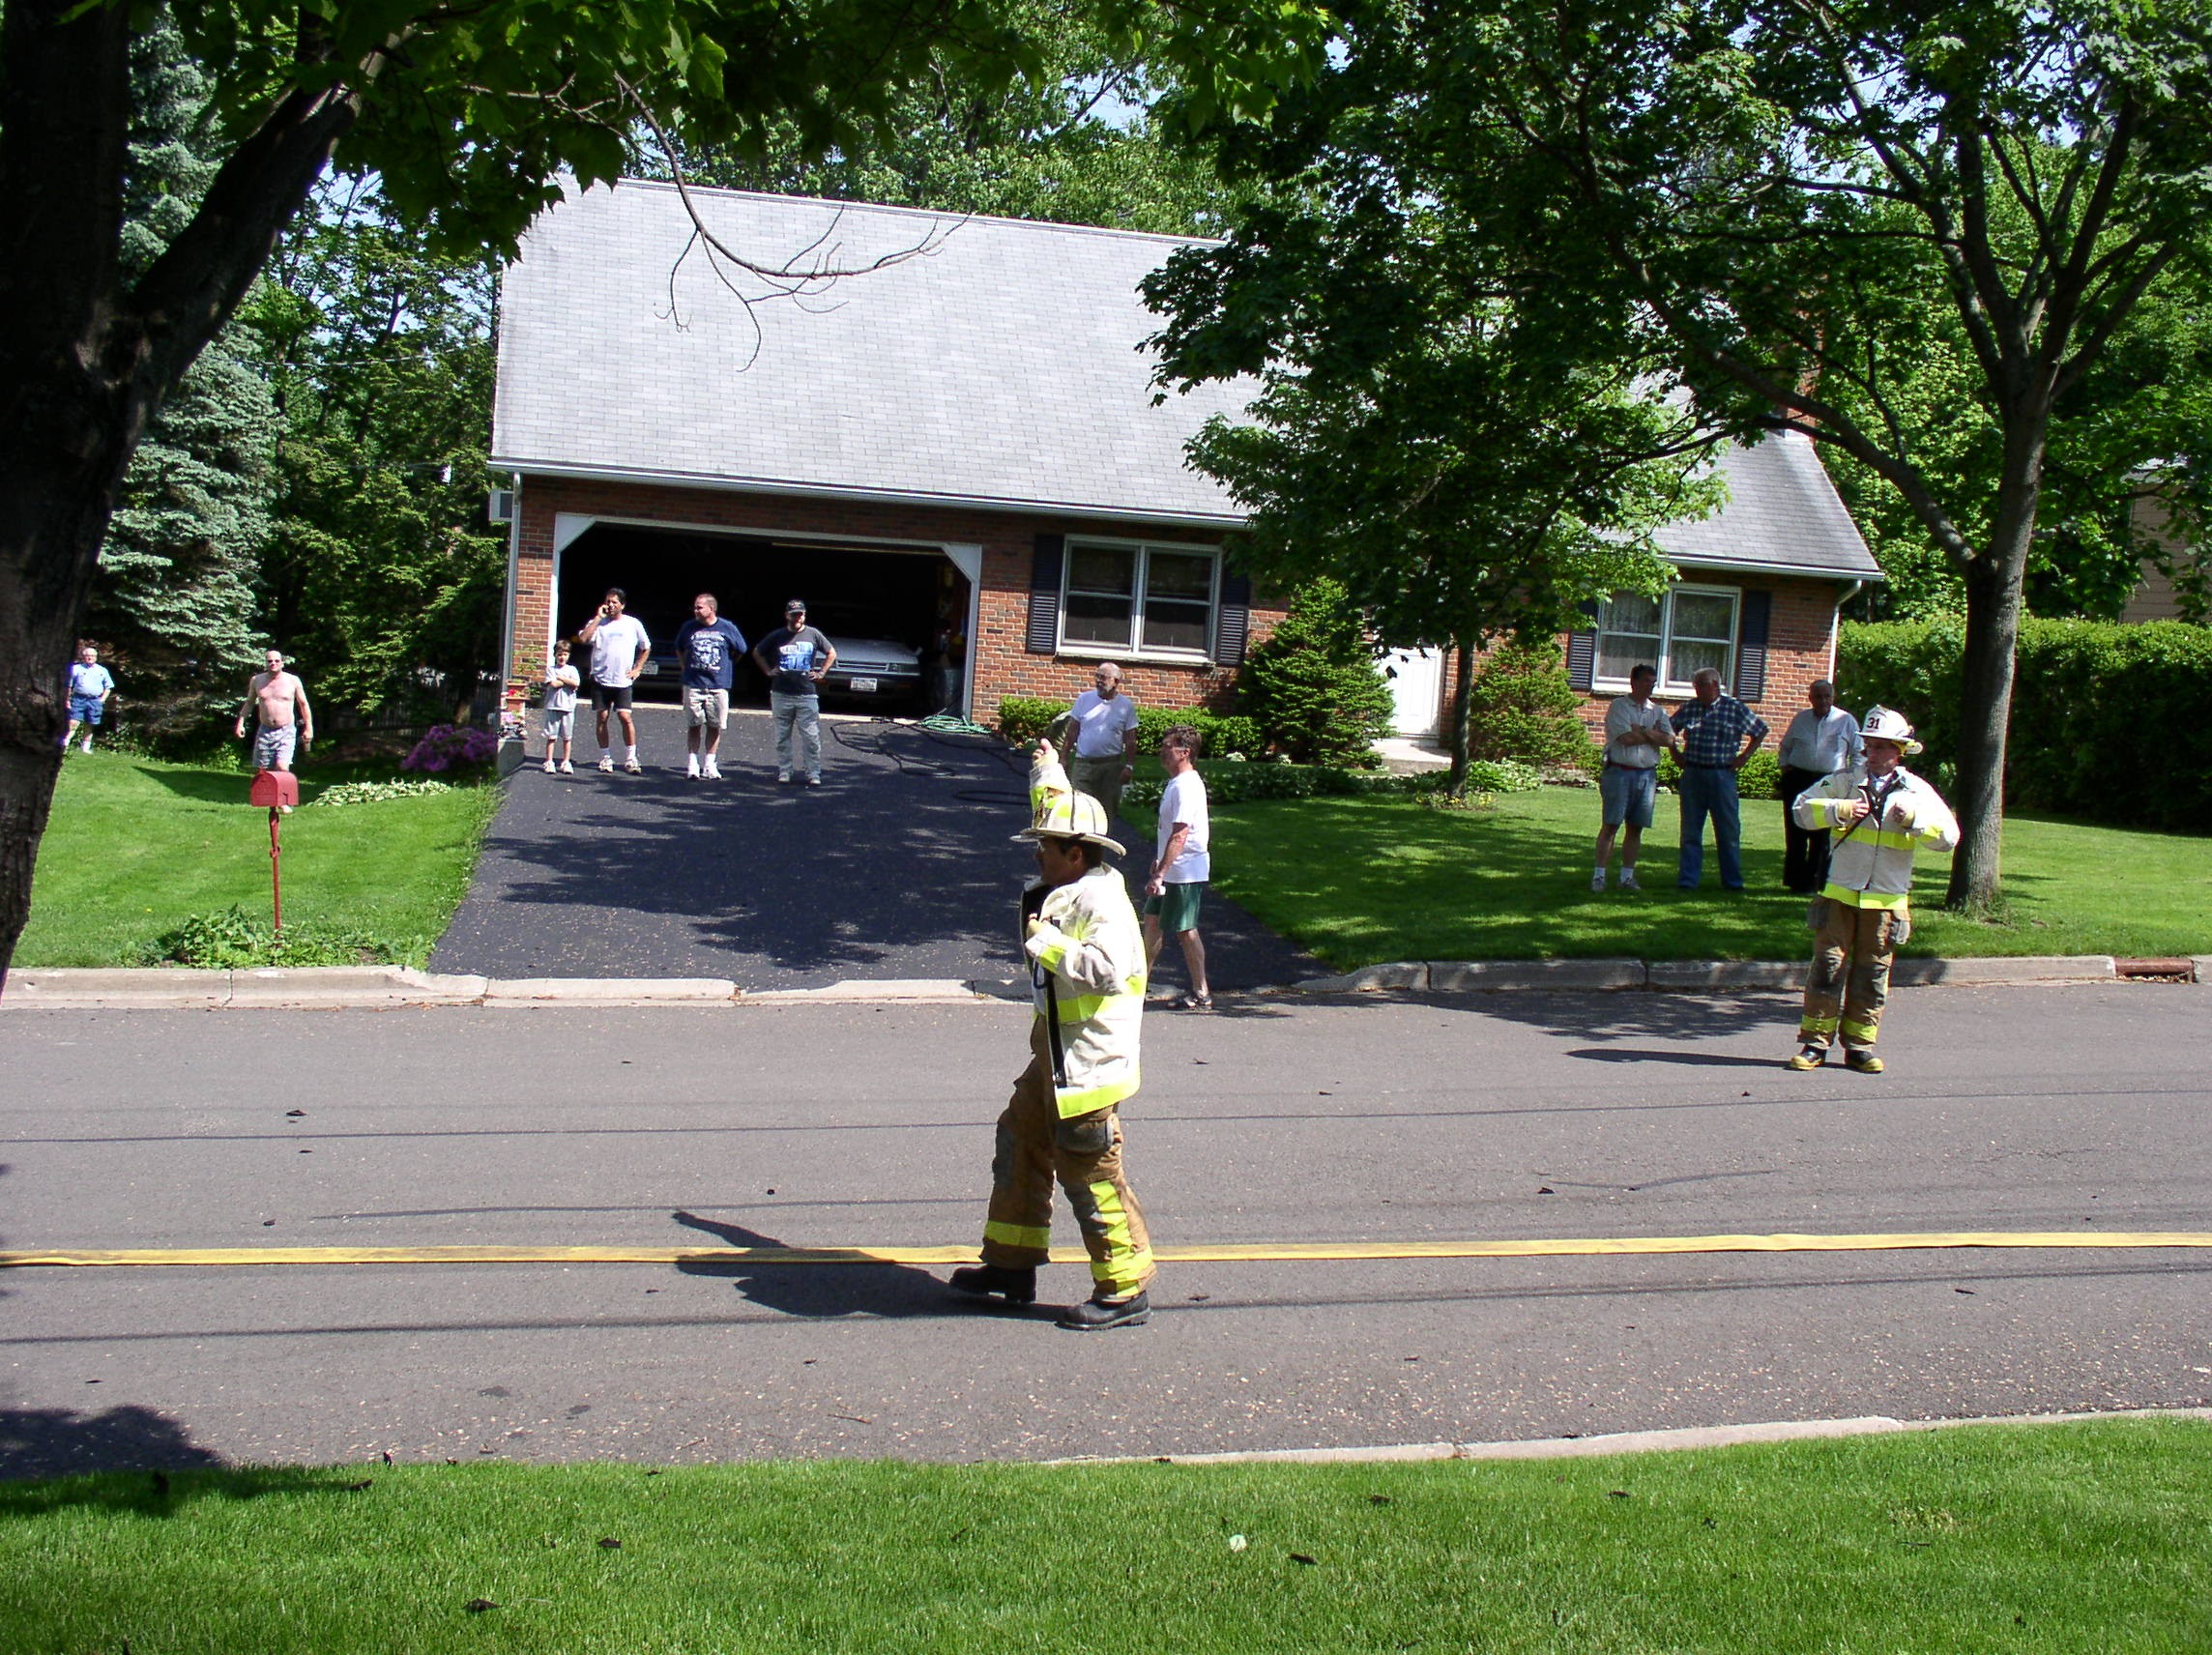 05-23-04  Response - Fire - 1019 Forest